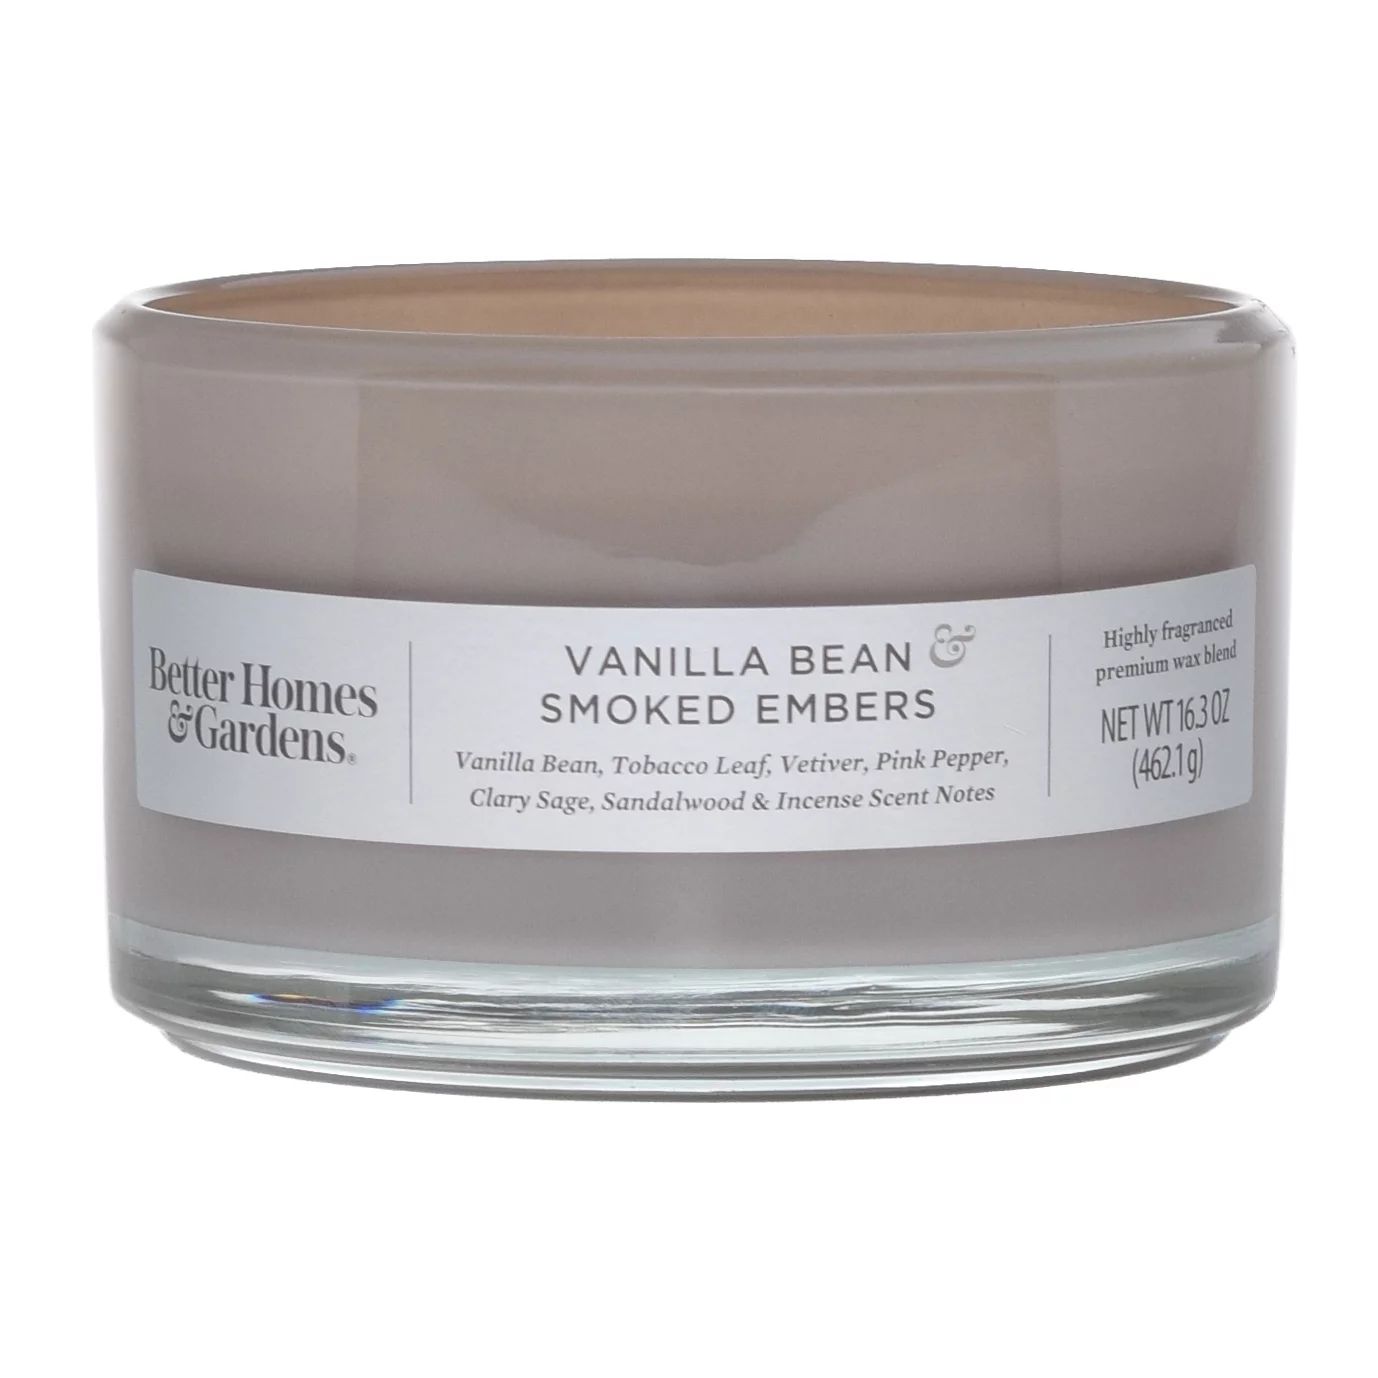 Better Homes & Gardens 16oz Vanilla Bean & Smoked Embers Scented 3-Wick Dish Candle | Walmart (US)